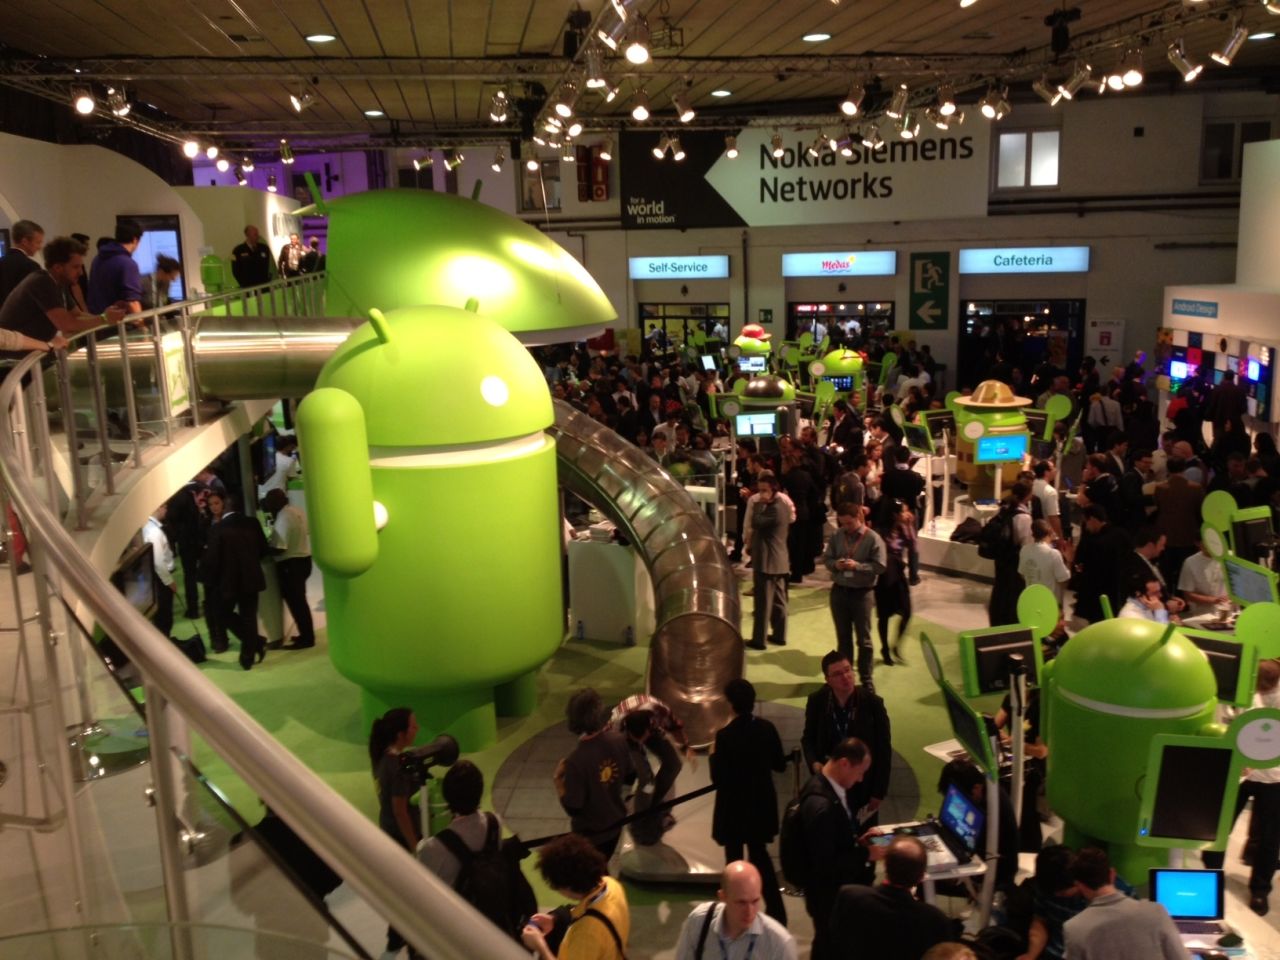 People wander through the Android display area. With no official Apple presence at the Mobile World Congress, Android phones dominate.